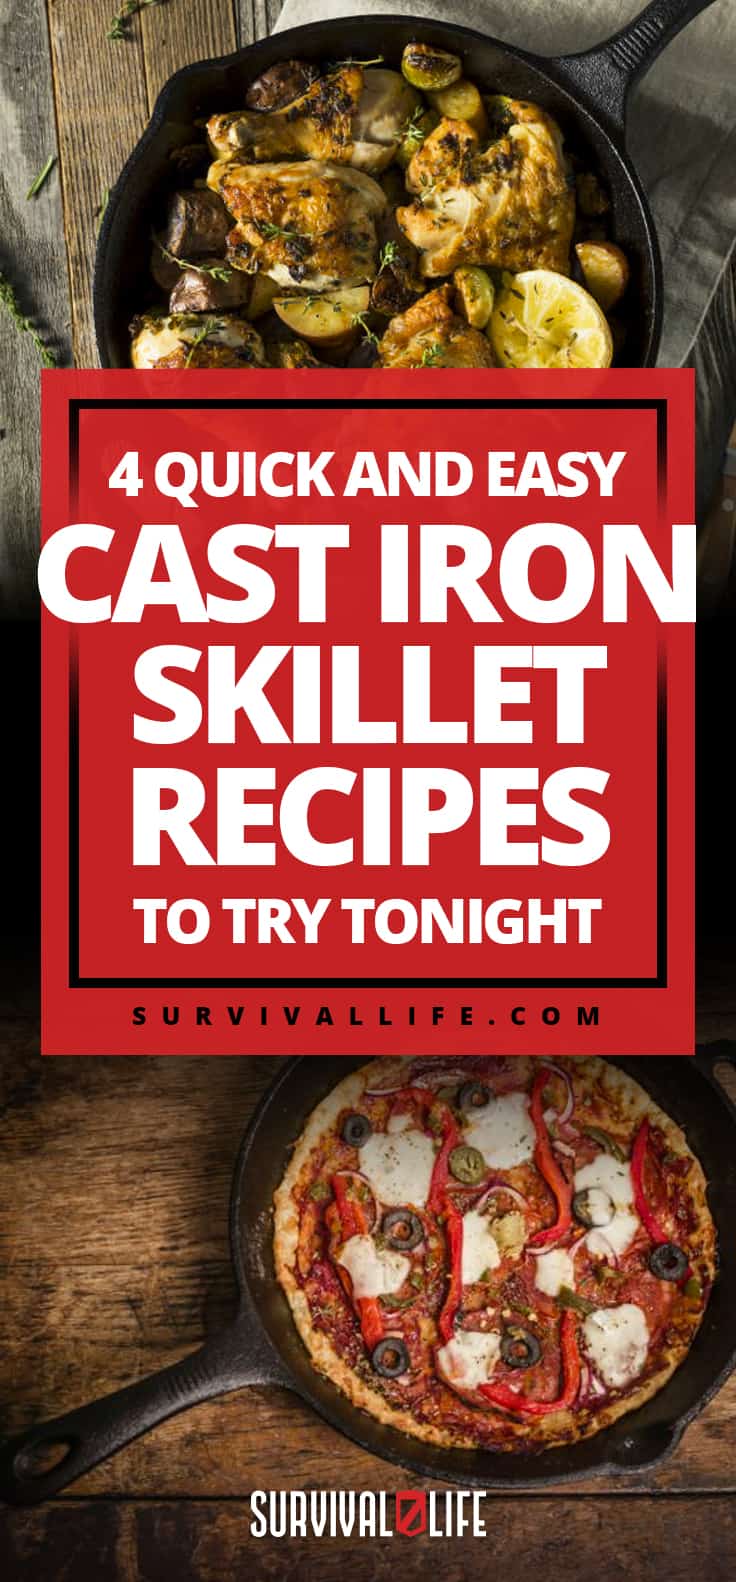 4 Quick and Easy Cast Iron Skillet Recipes To Try Tonight